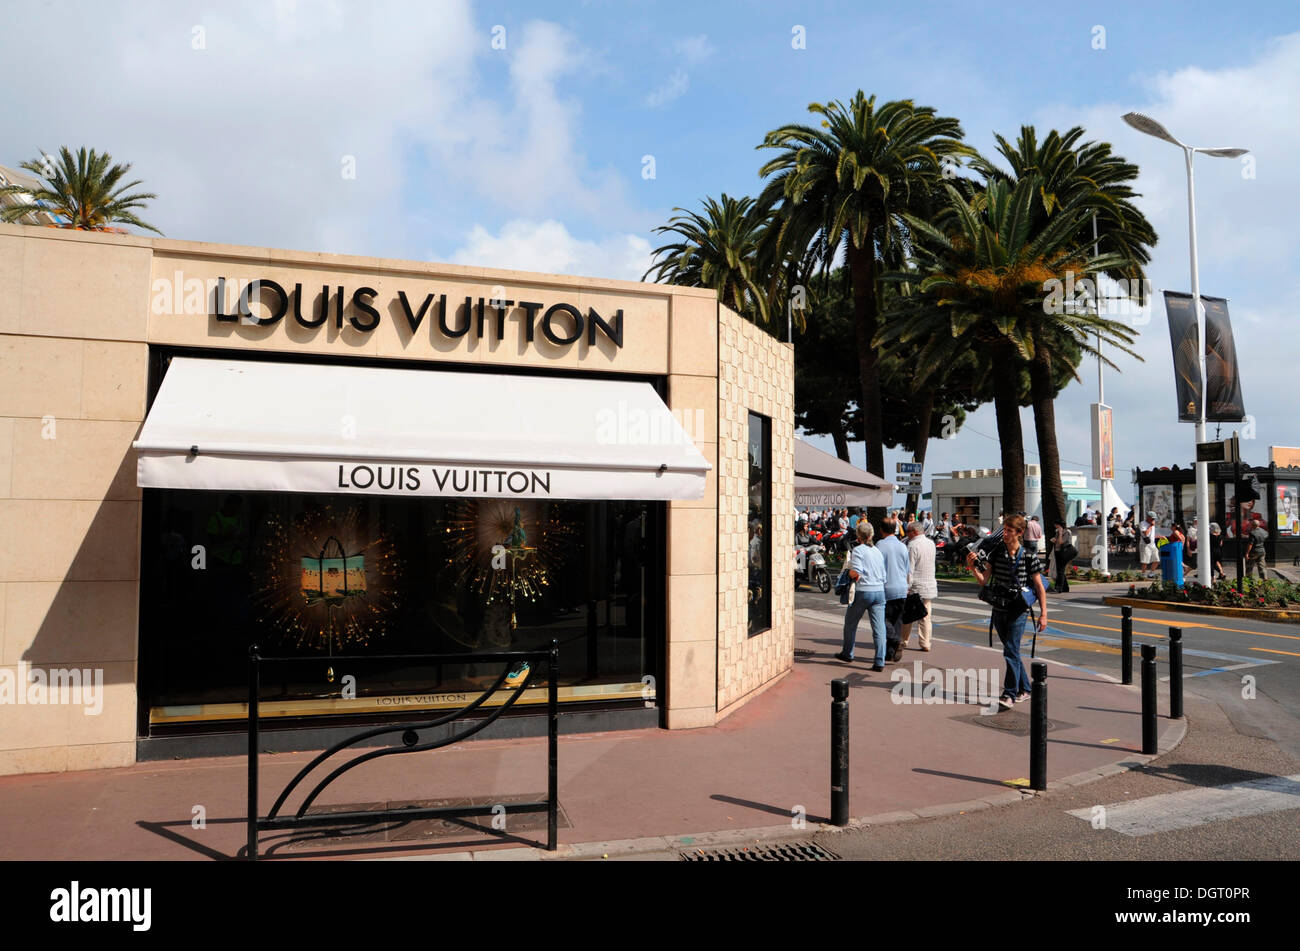 Louis Vuitton store in Cannes, France, Europe Stock Photo - Alamy